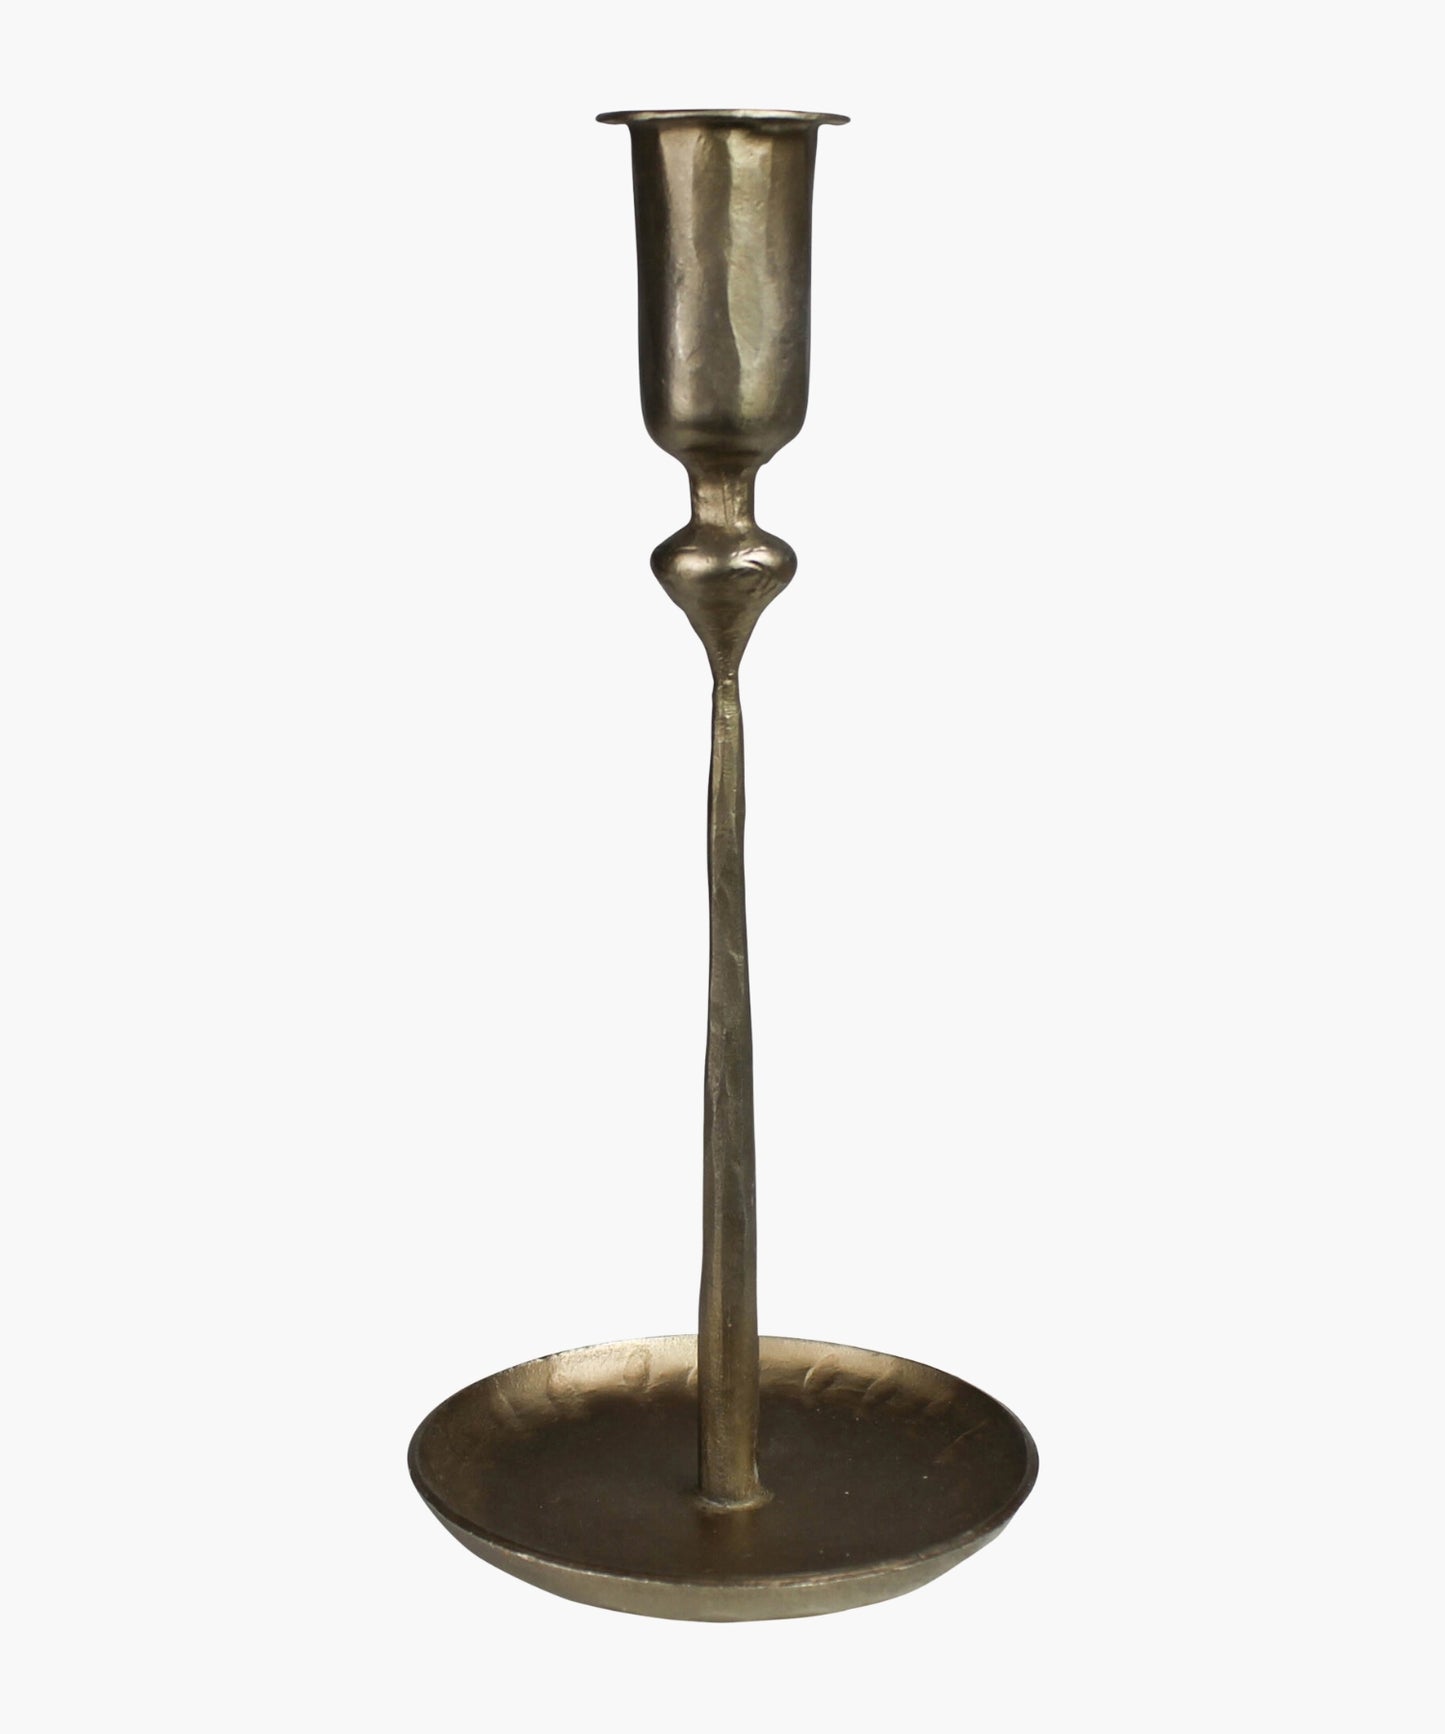 Pierre Candlestick, 3 sizes